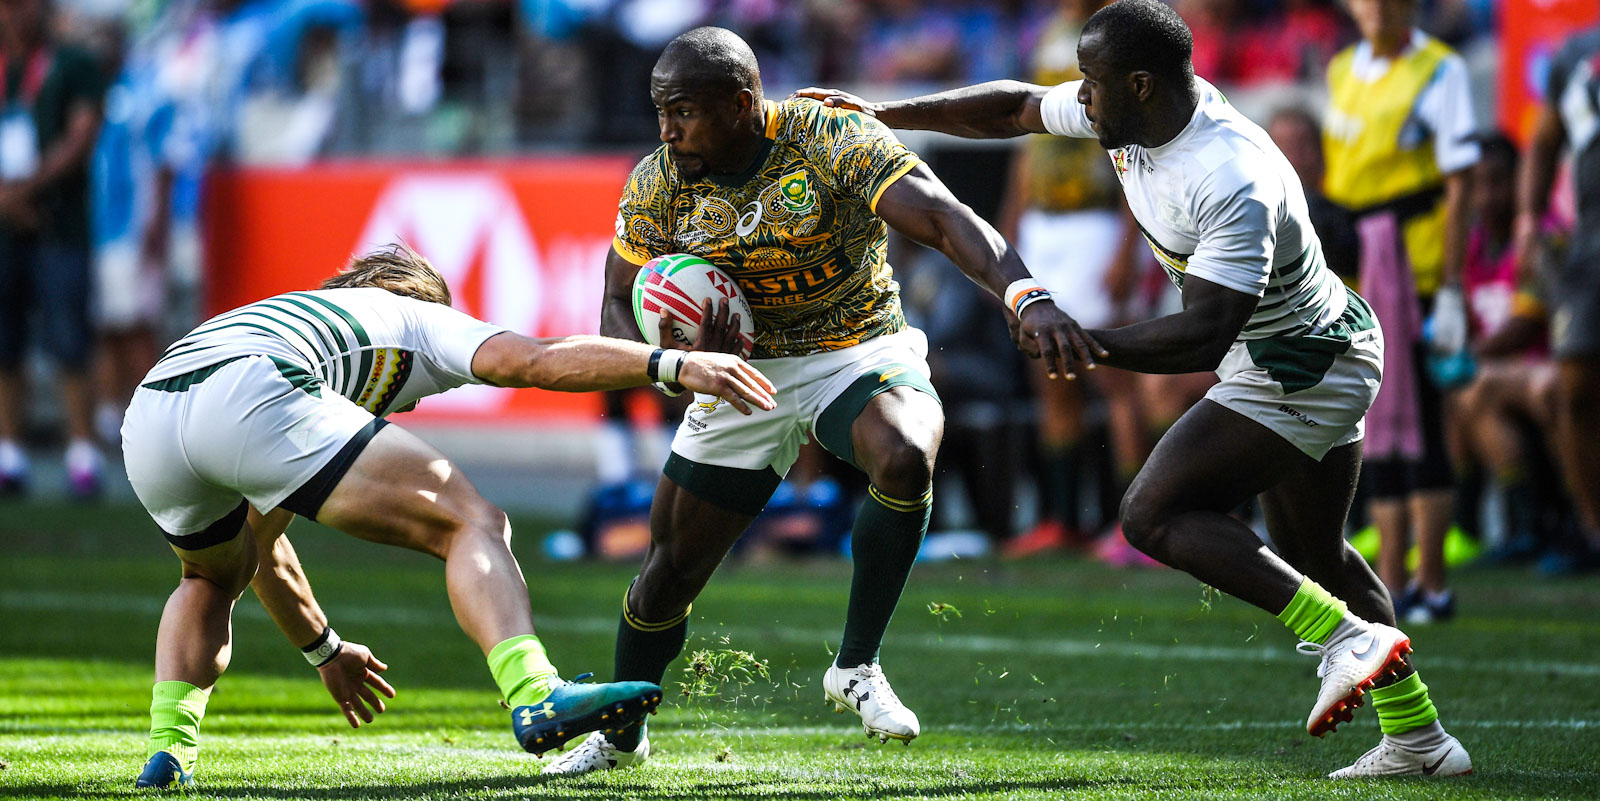 Siviwe Soyizwapi in action at the HSBC Cape Town Sevens in 2018